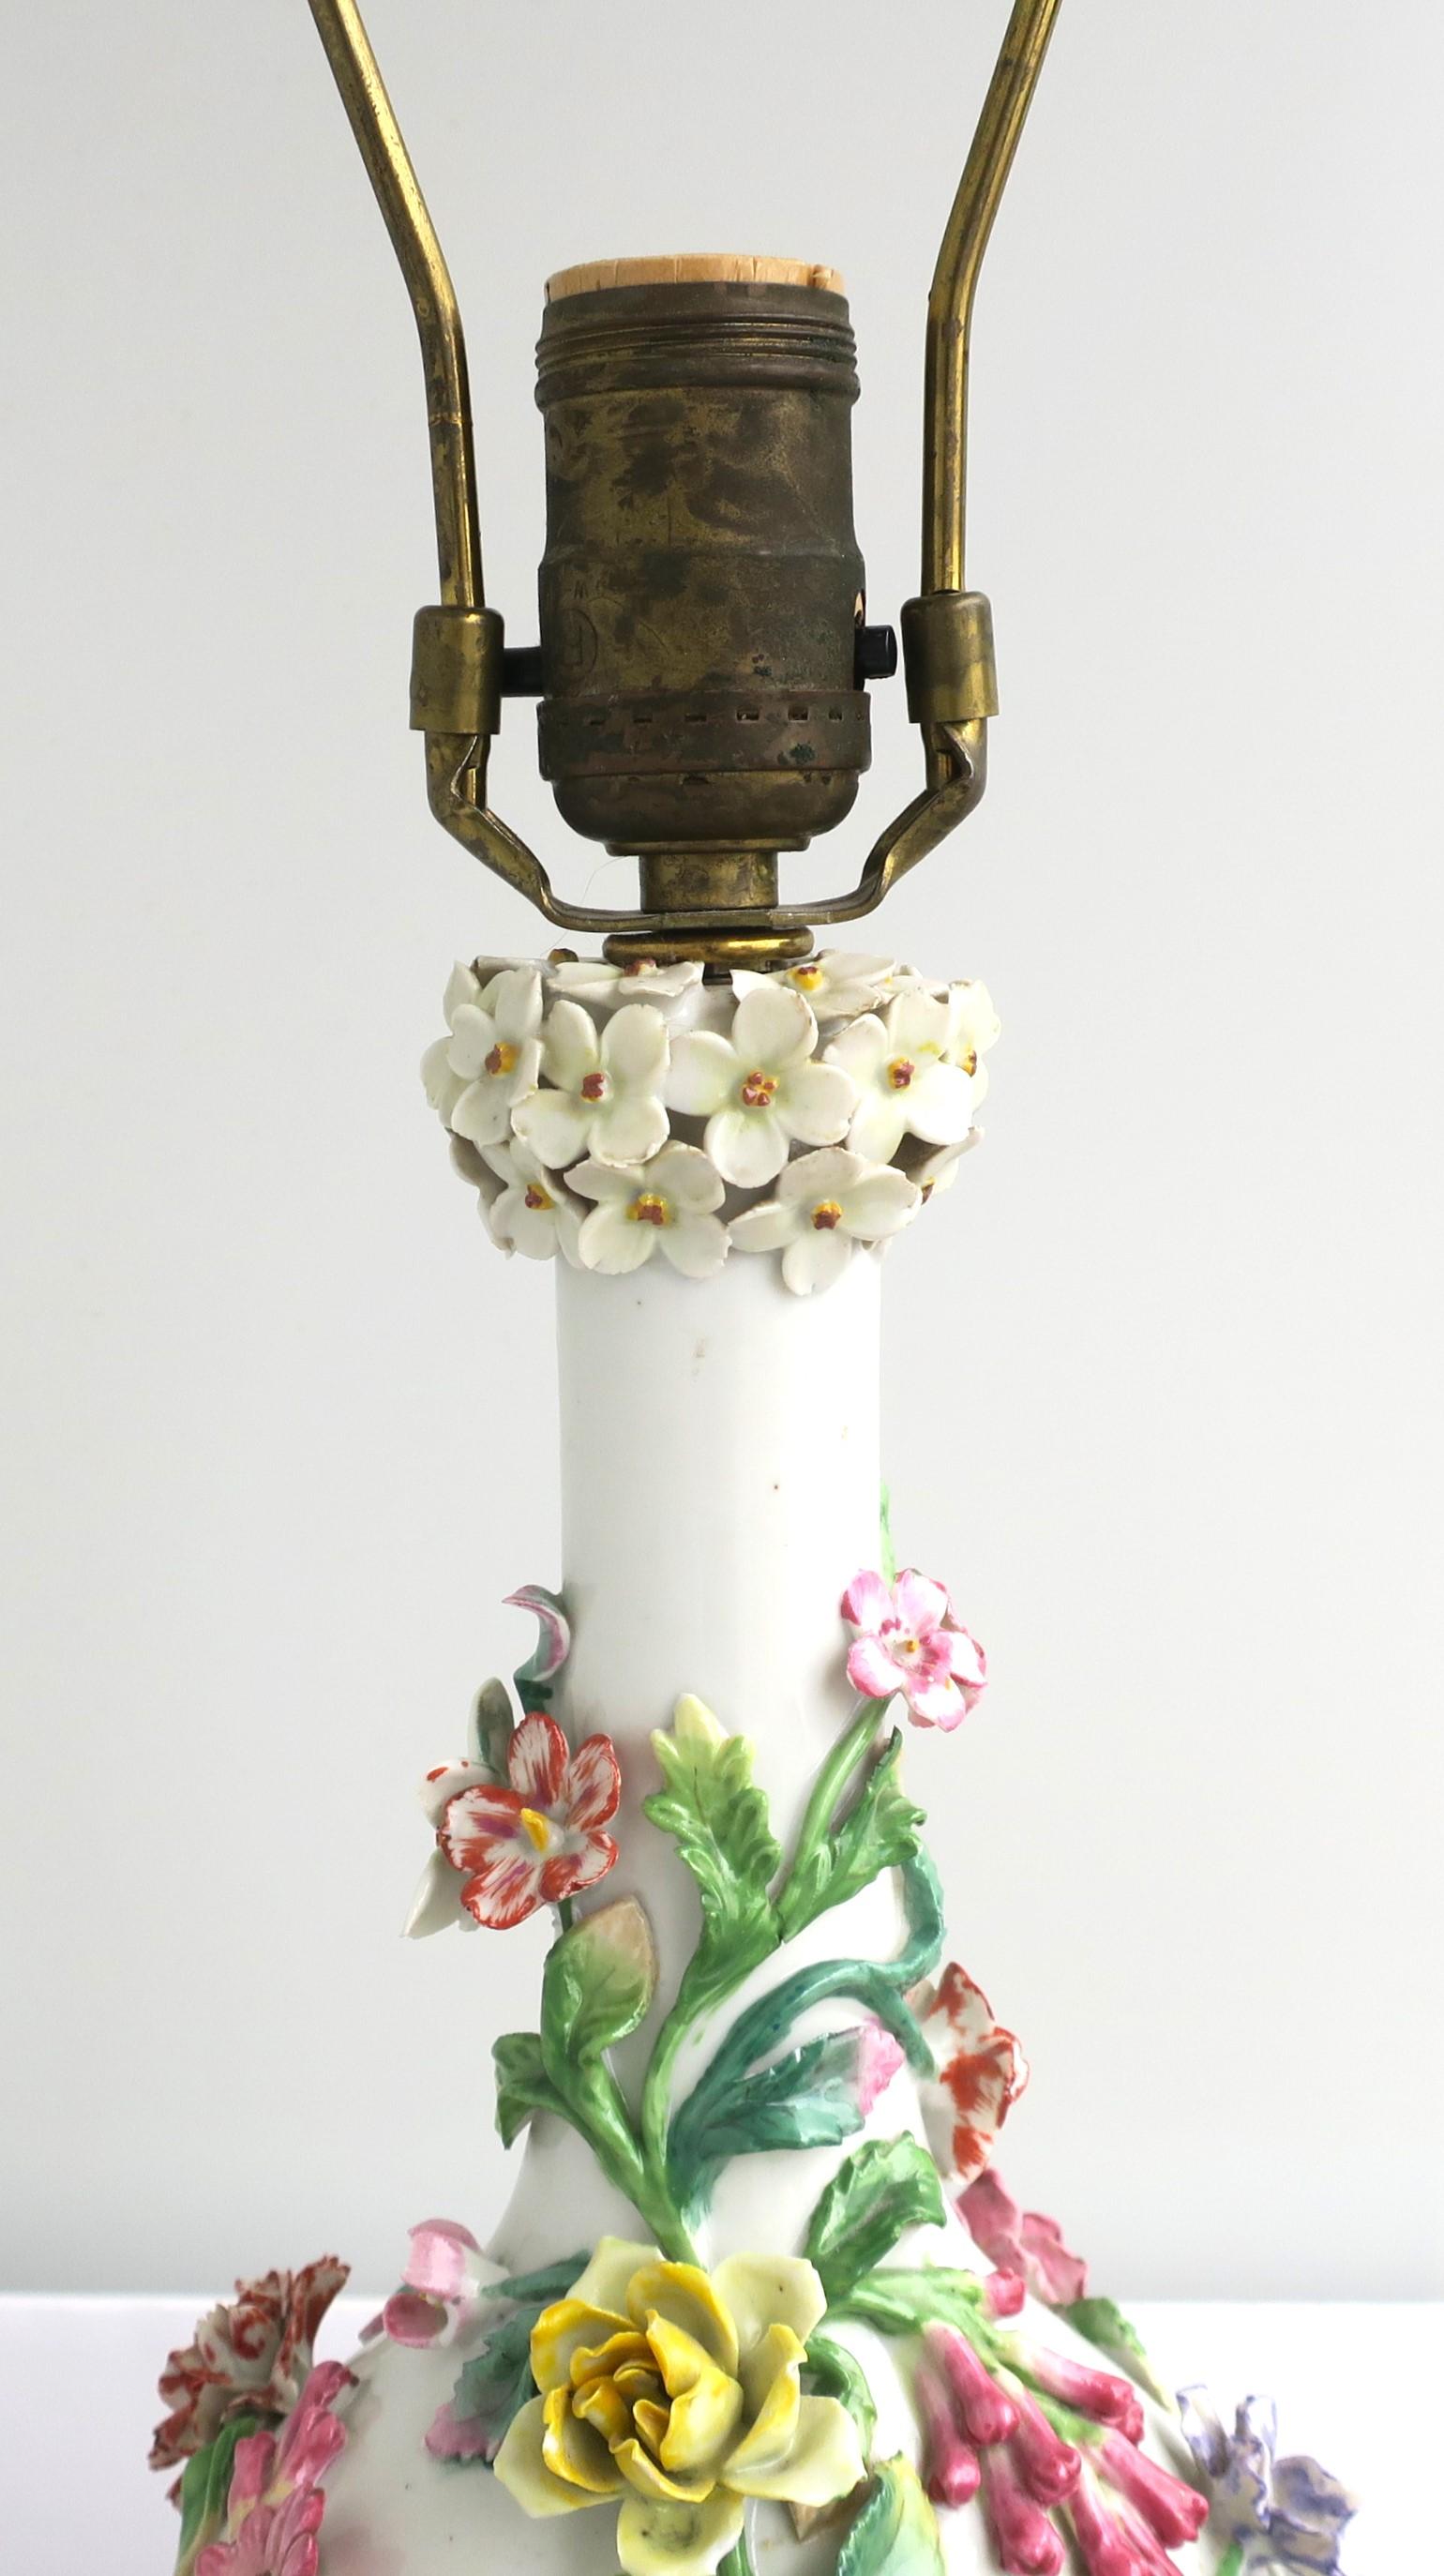 Italian White Porcelain Lamp with Colorful Flowers, Leaves & Vines Capo di Monte For Sale 5